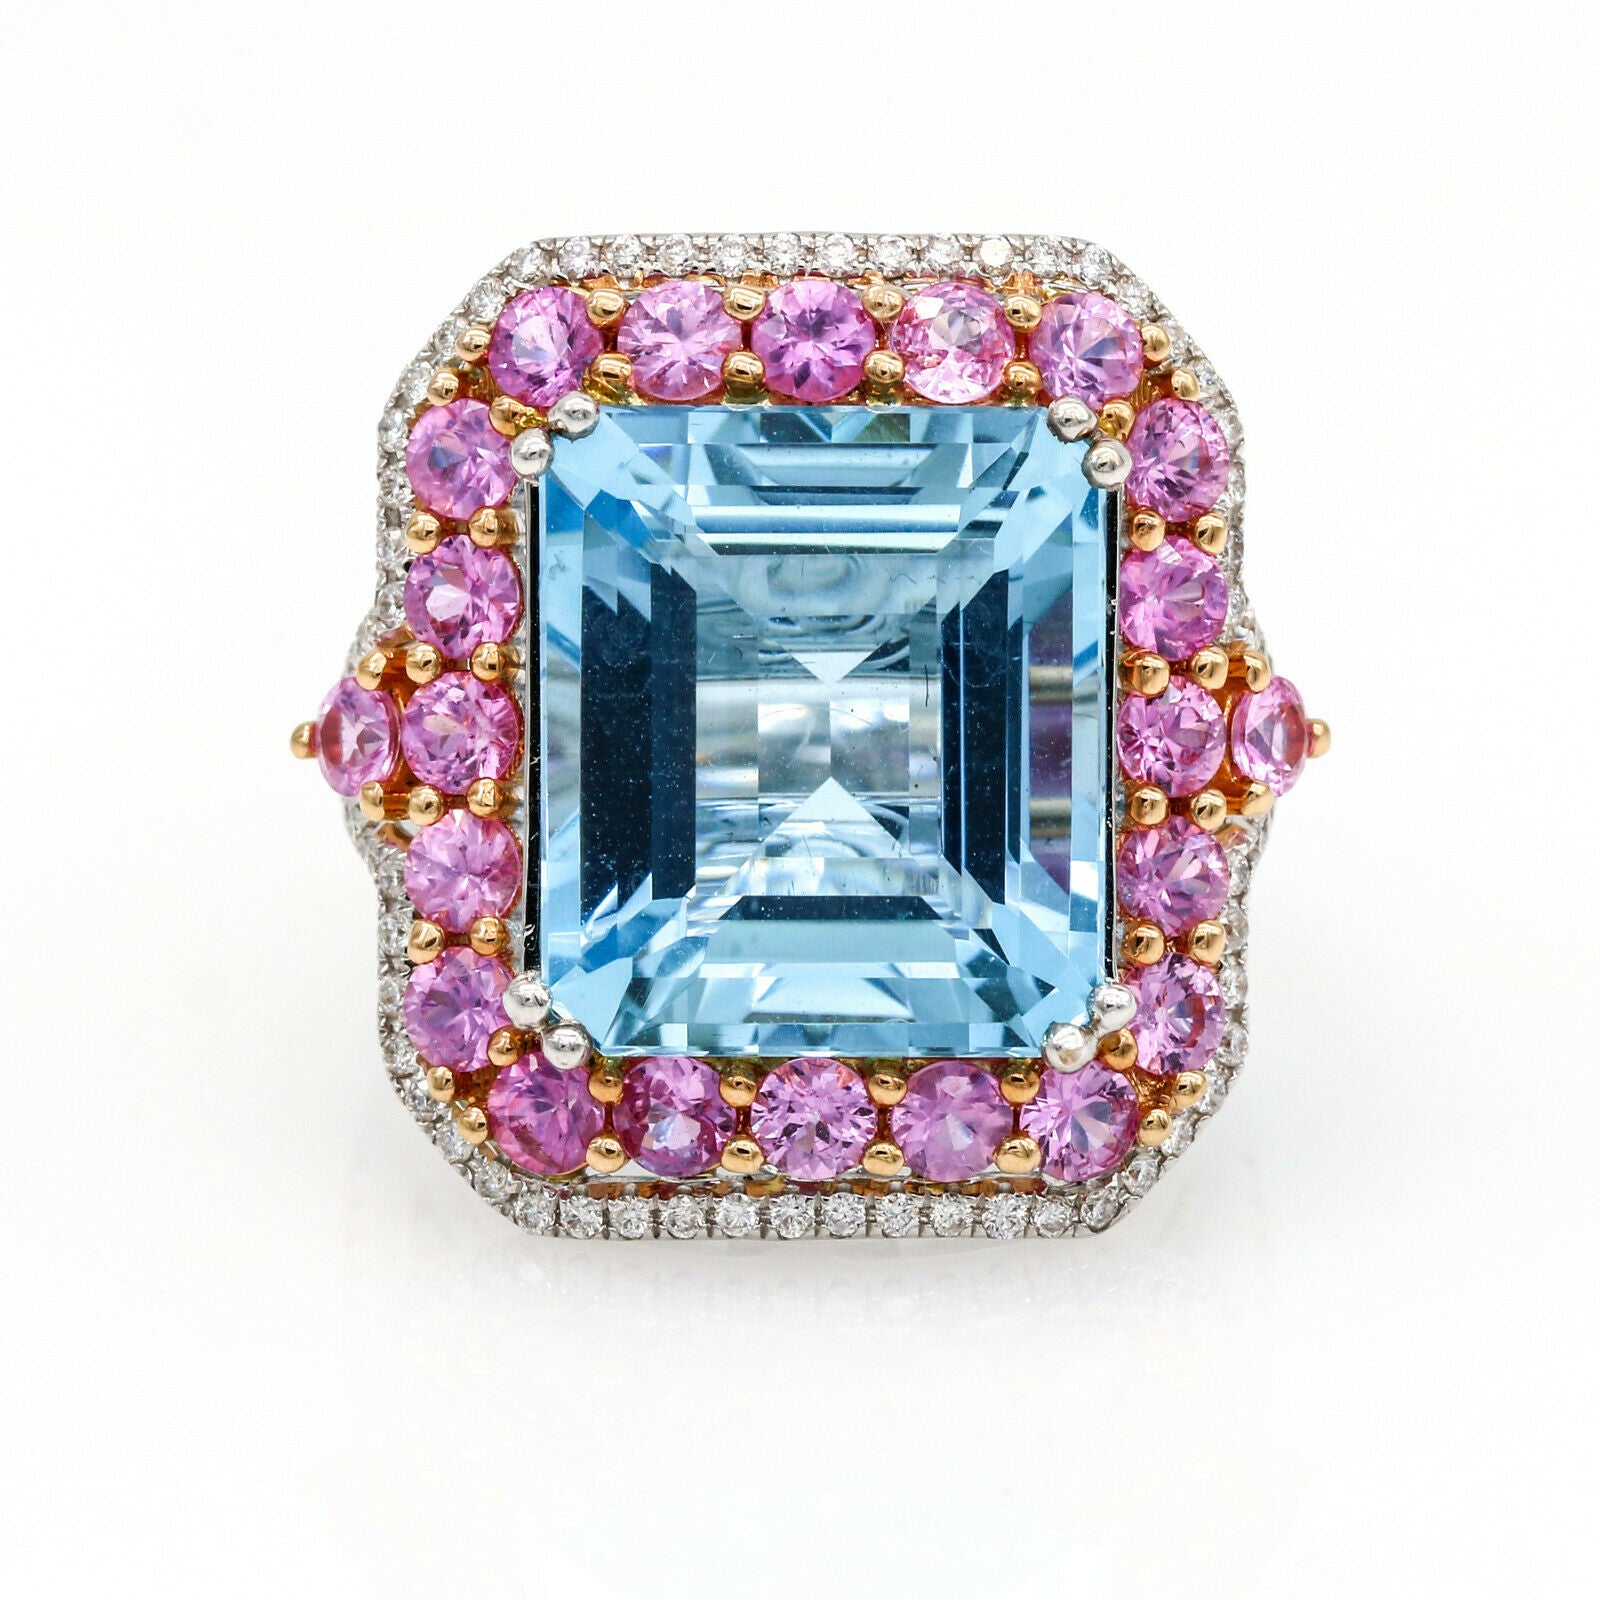 Aquamarine and Pink Sapphire Statement Ring in 18k White Gold (15.82 cttw)